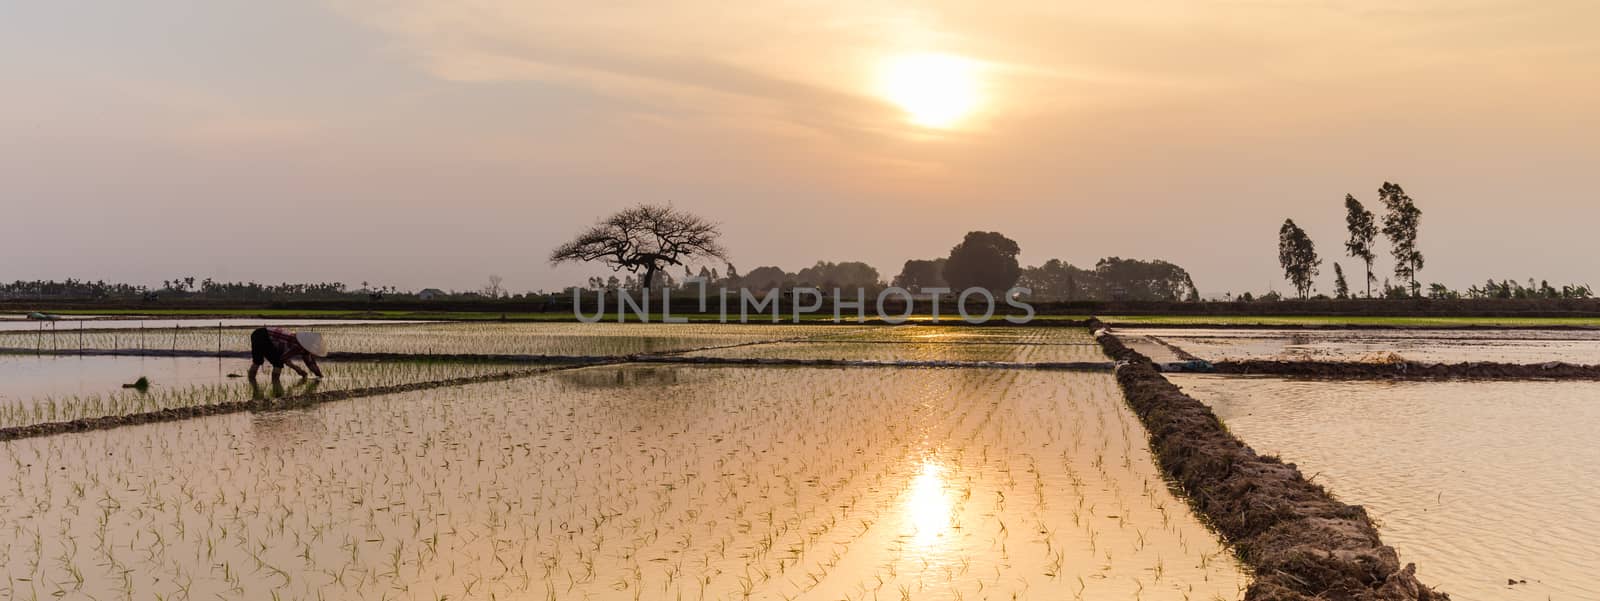 Back view of woman transplanting rice plant on flooded patches at sunset near Hanoi by trongnguyen